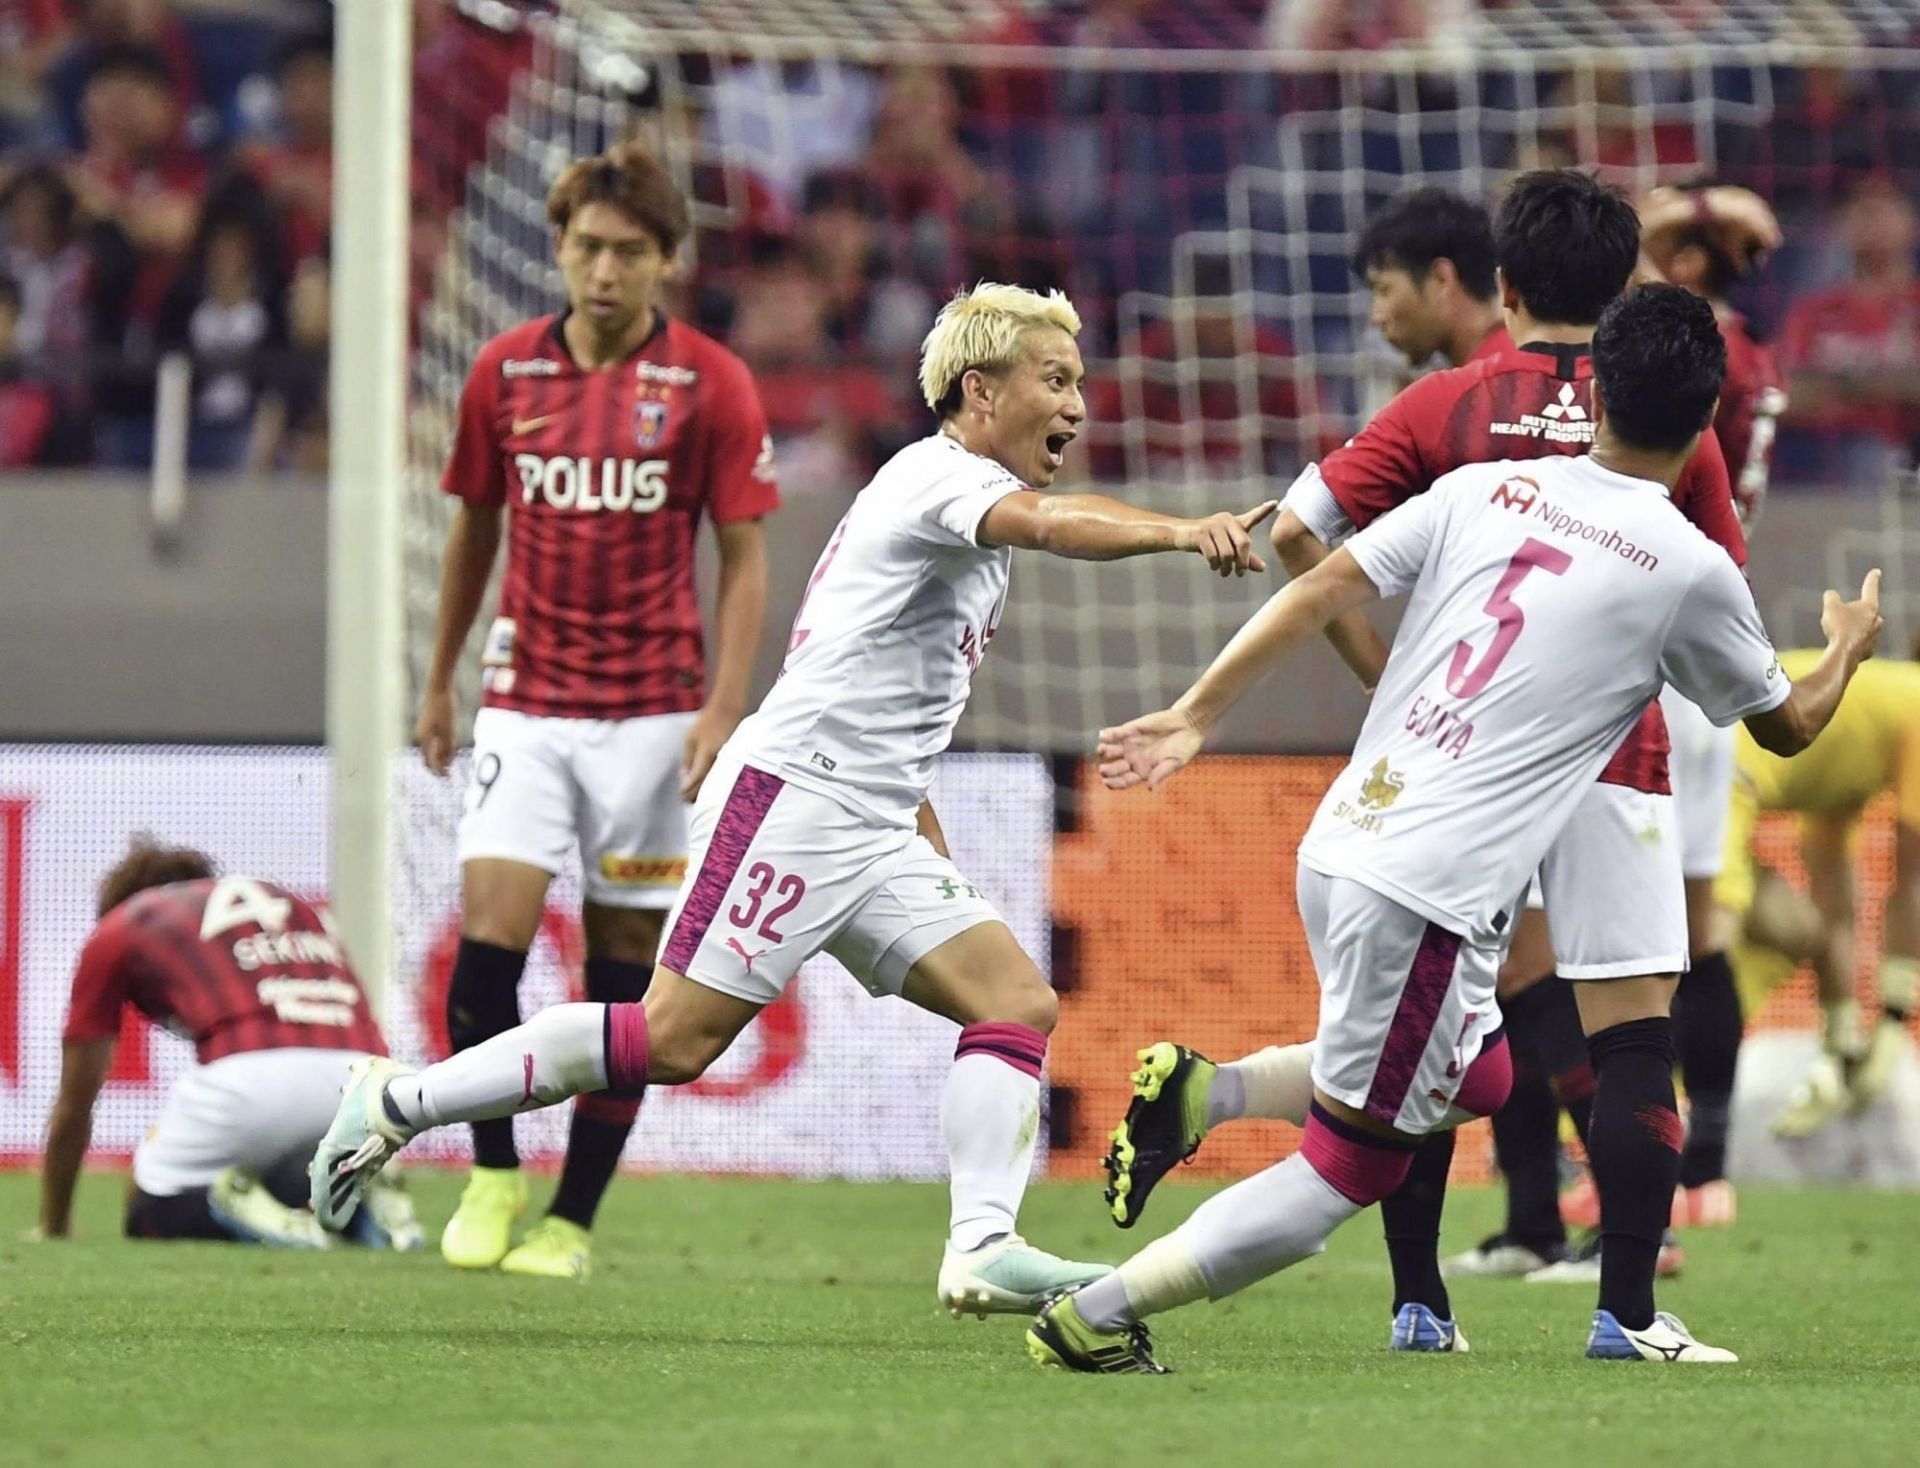 Cerezo Osaka and Urawa Reds meet in the J League Cup semi-final on Wednesday